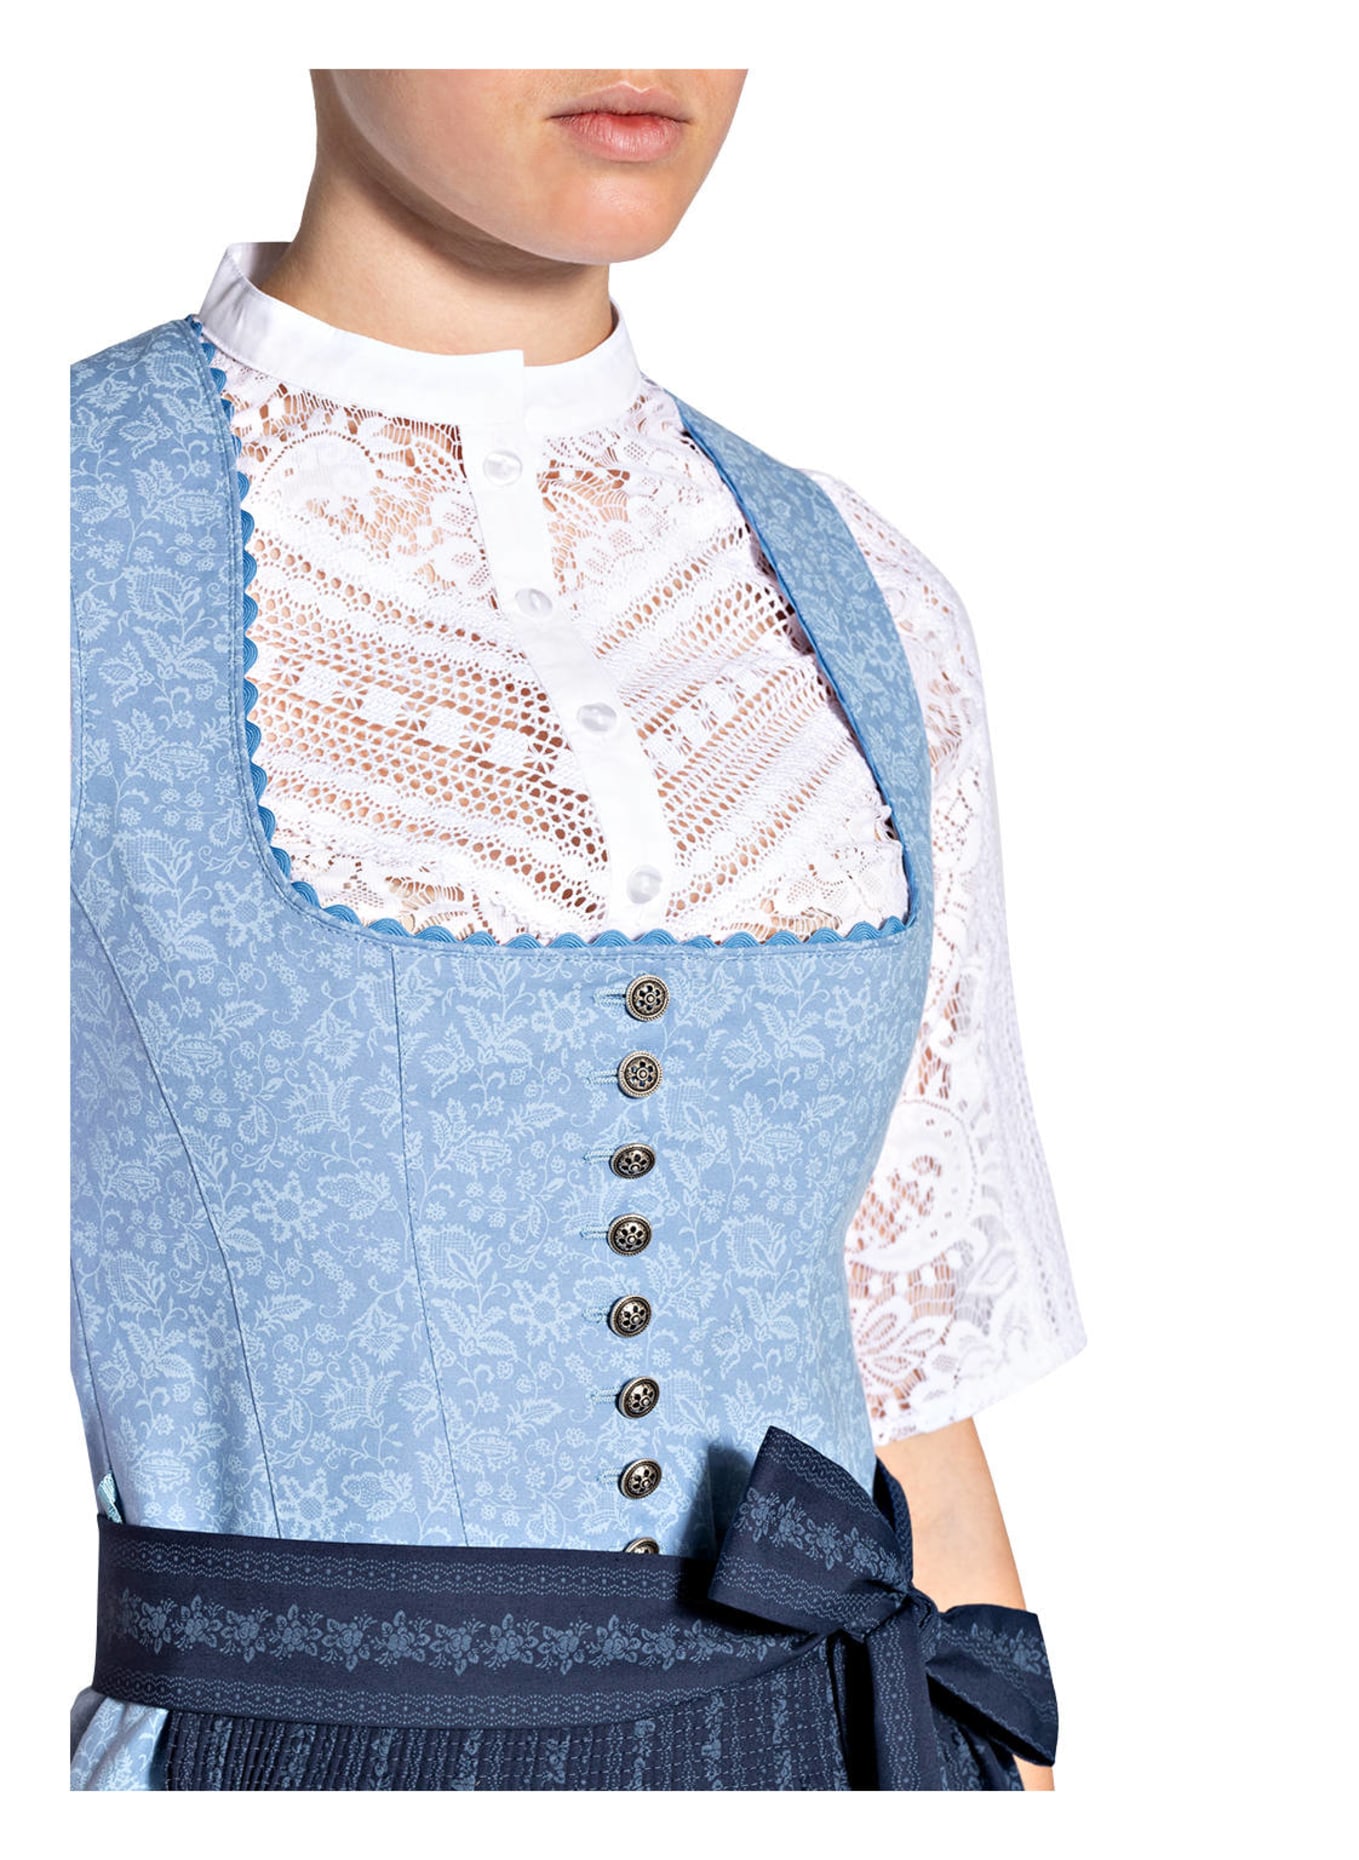 BERWIN & WOLFF Dirndl blouse made of lace, Color: WHITE (Image 3)